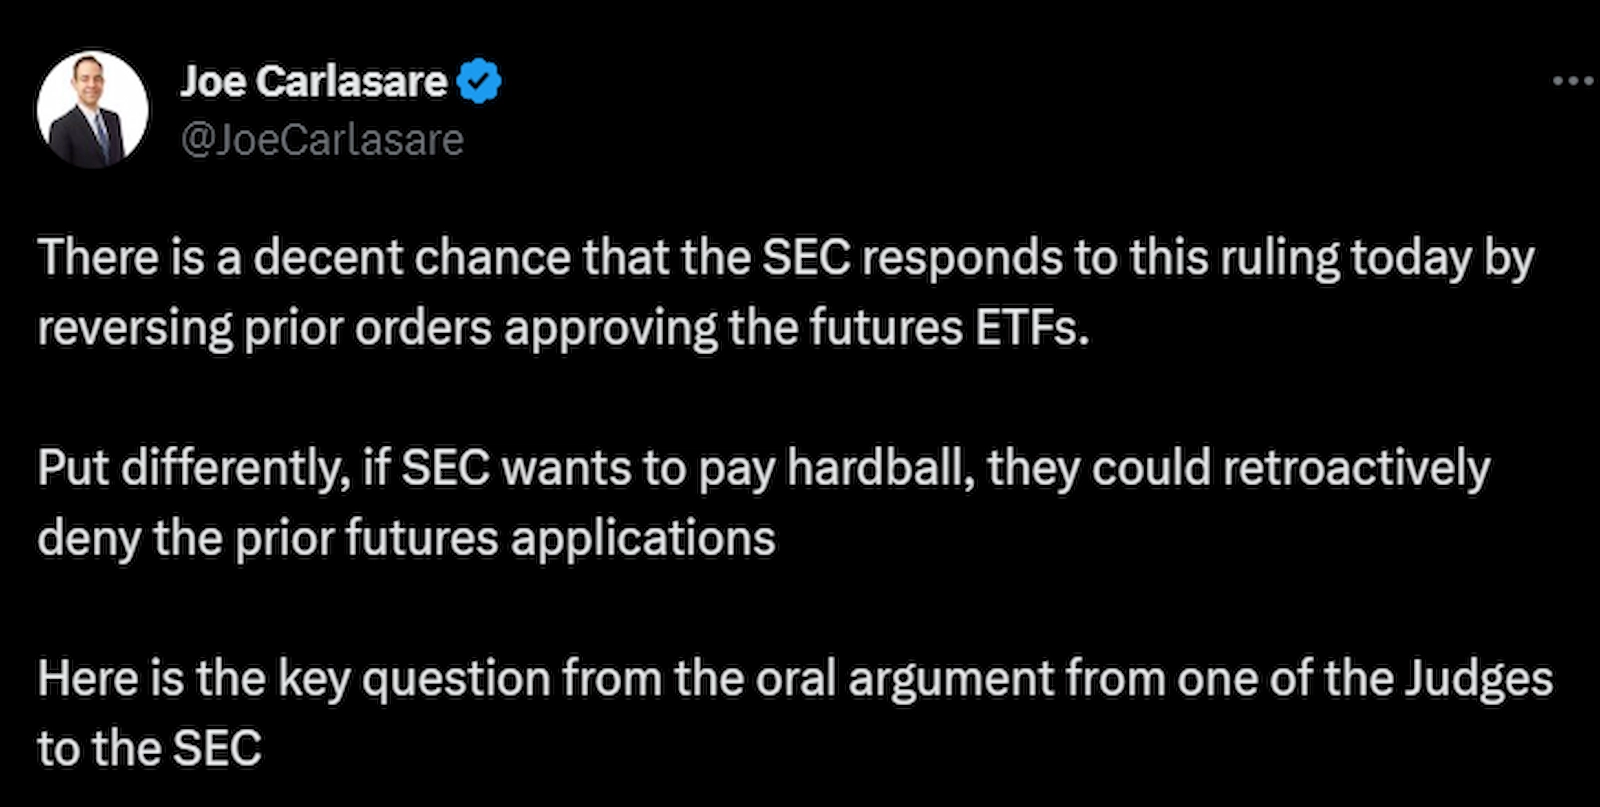 Litigator Joe Carlasare stated SEC could deny the prior futures ETF applications.